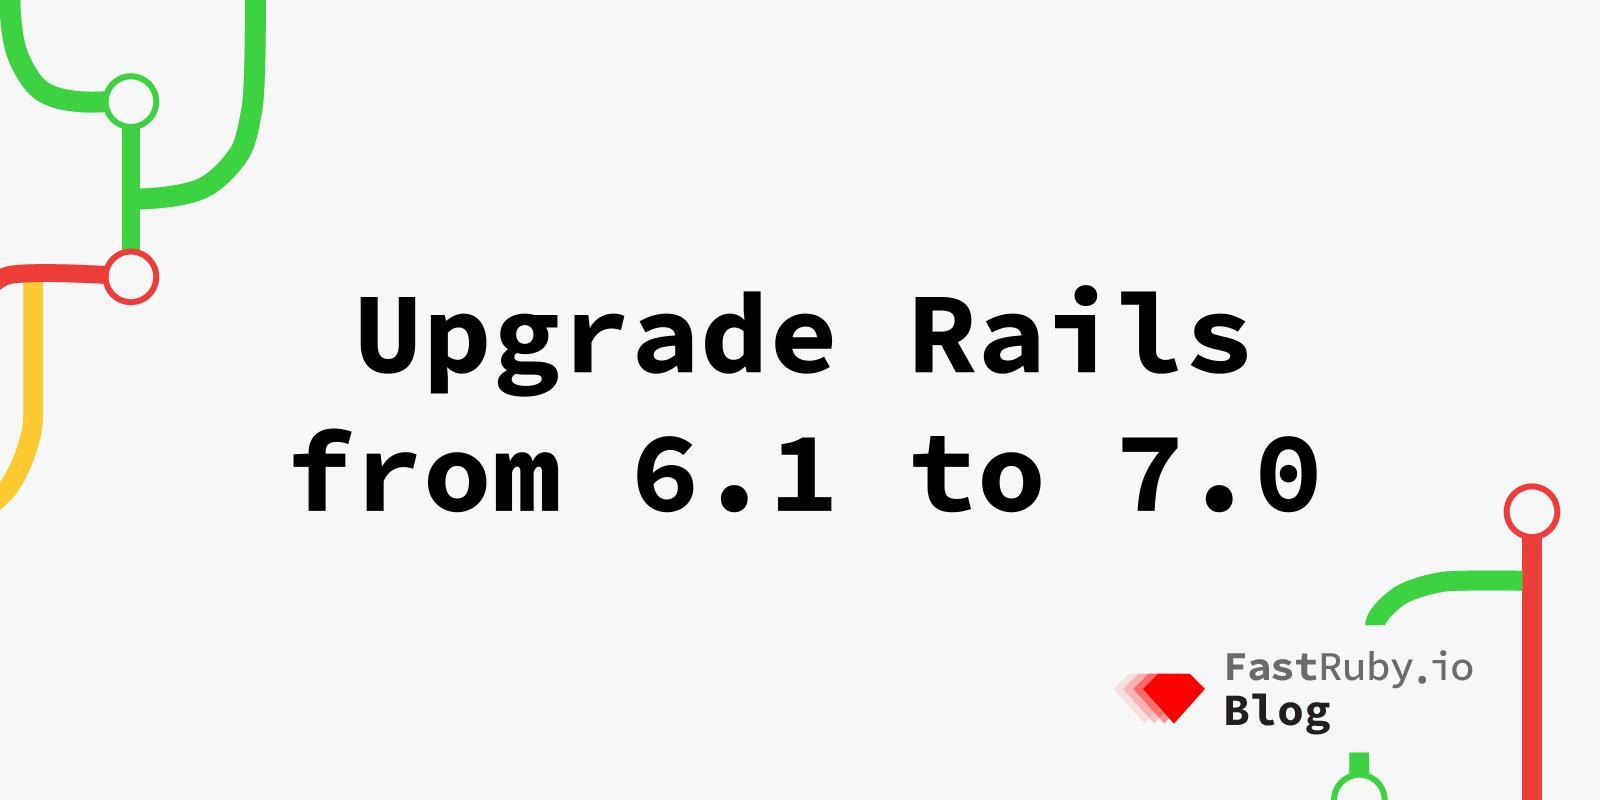 Upgrade Rails from 6.1 to 7.0